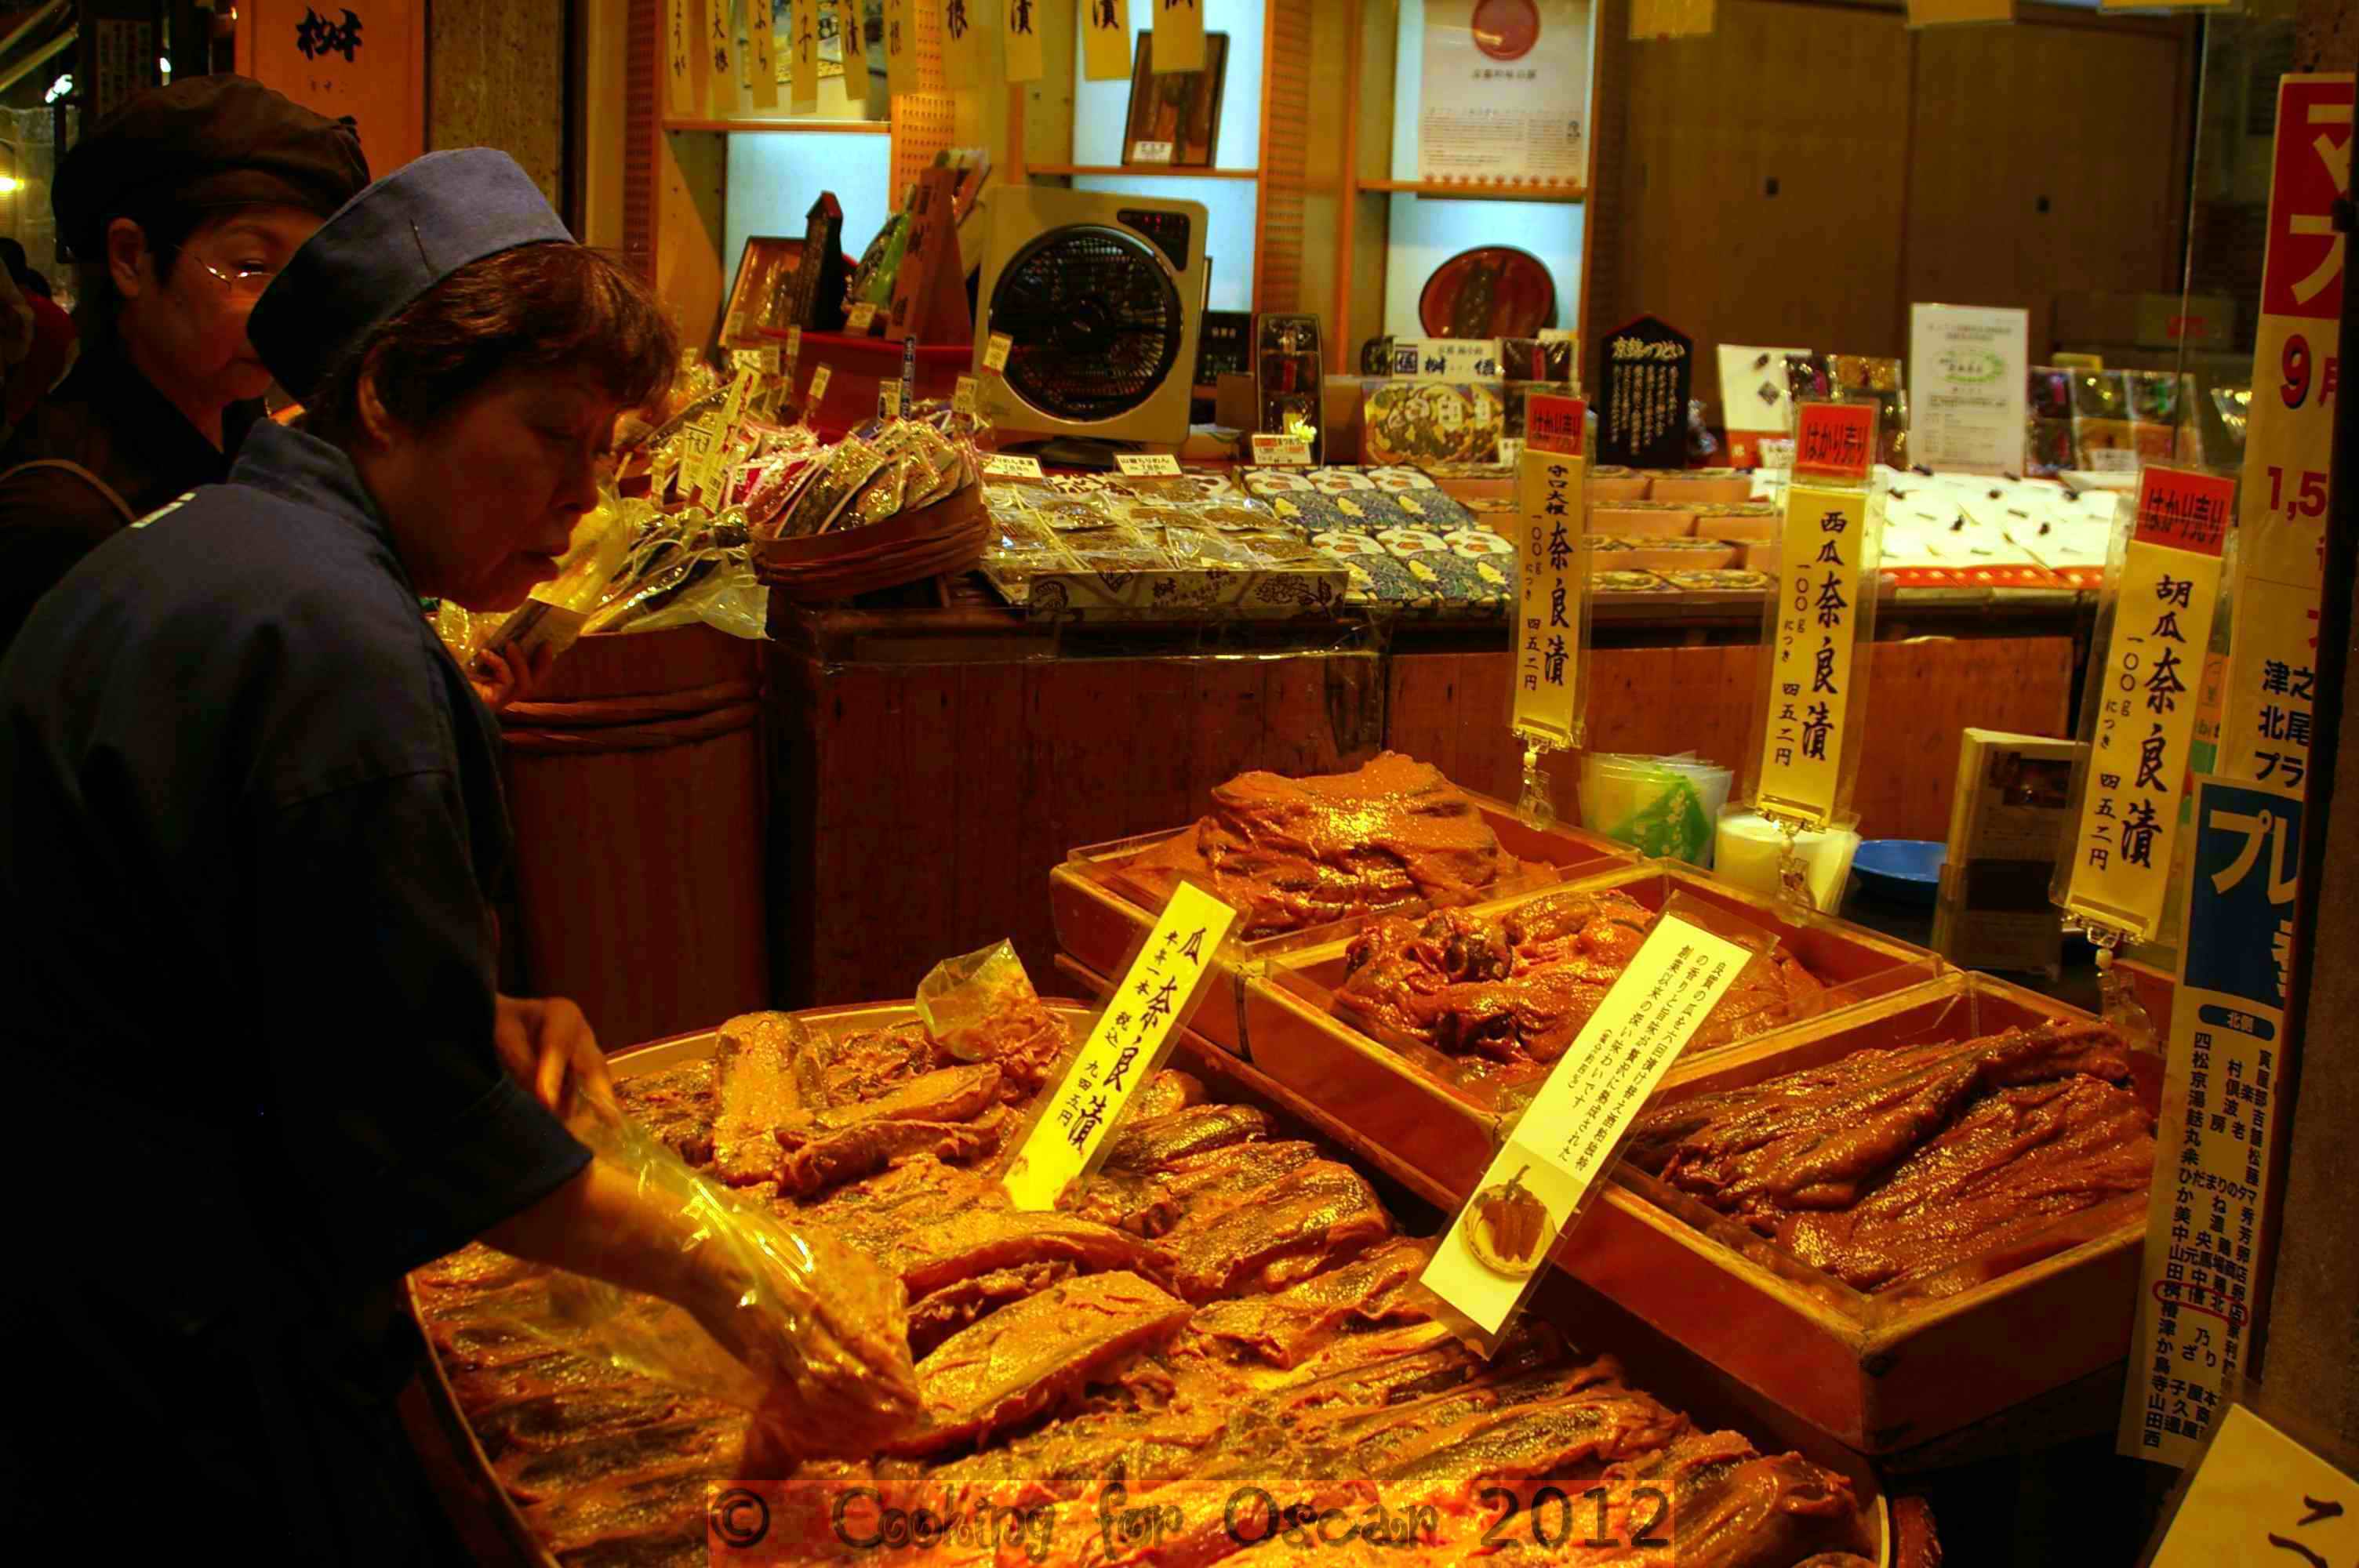 Japanese Market in Kyoto - Seafood